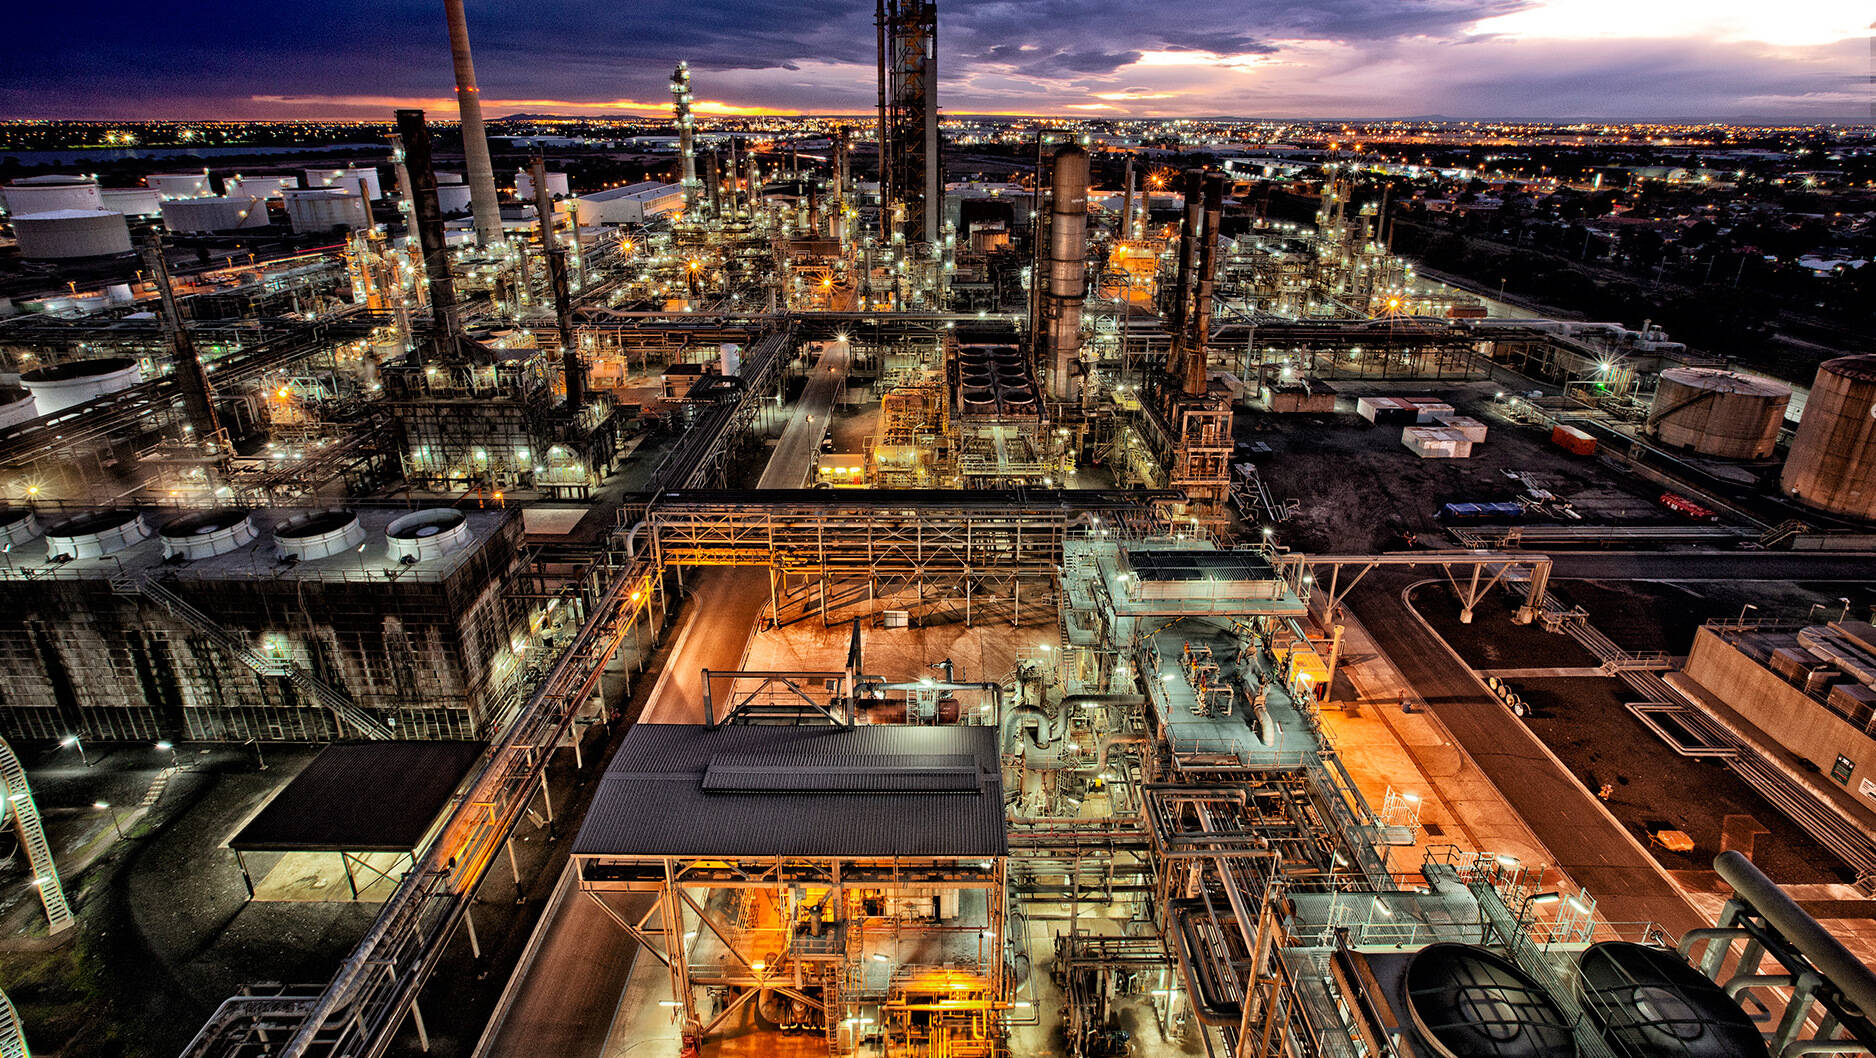 Image Photo  Mobil's Altona Refinery continues to defy Australias increasingly challenging environment for manufacturing, boosting state and local economies.